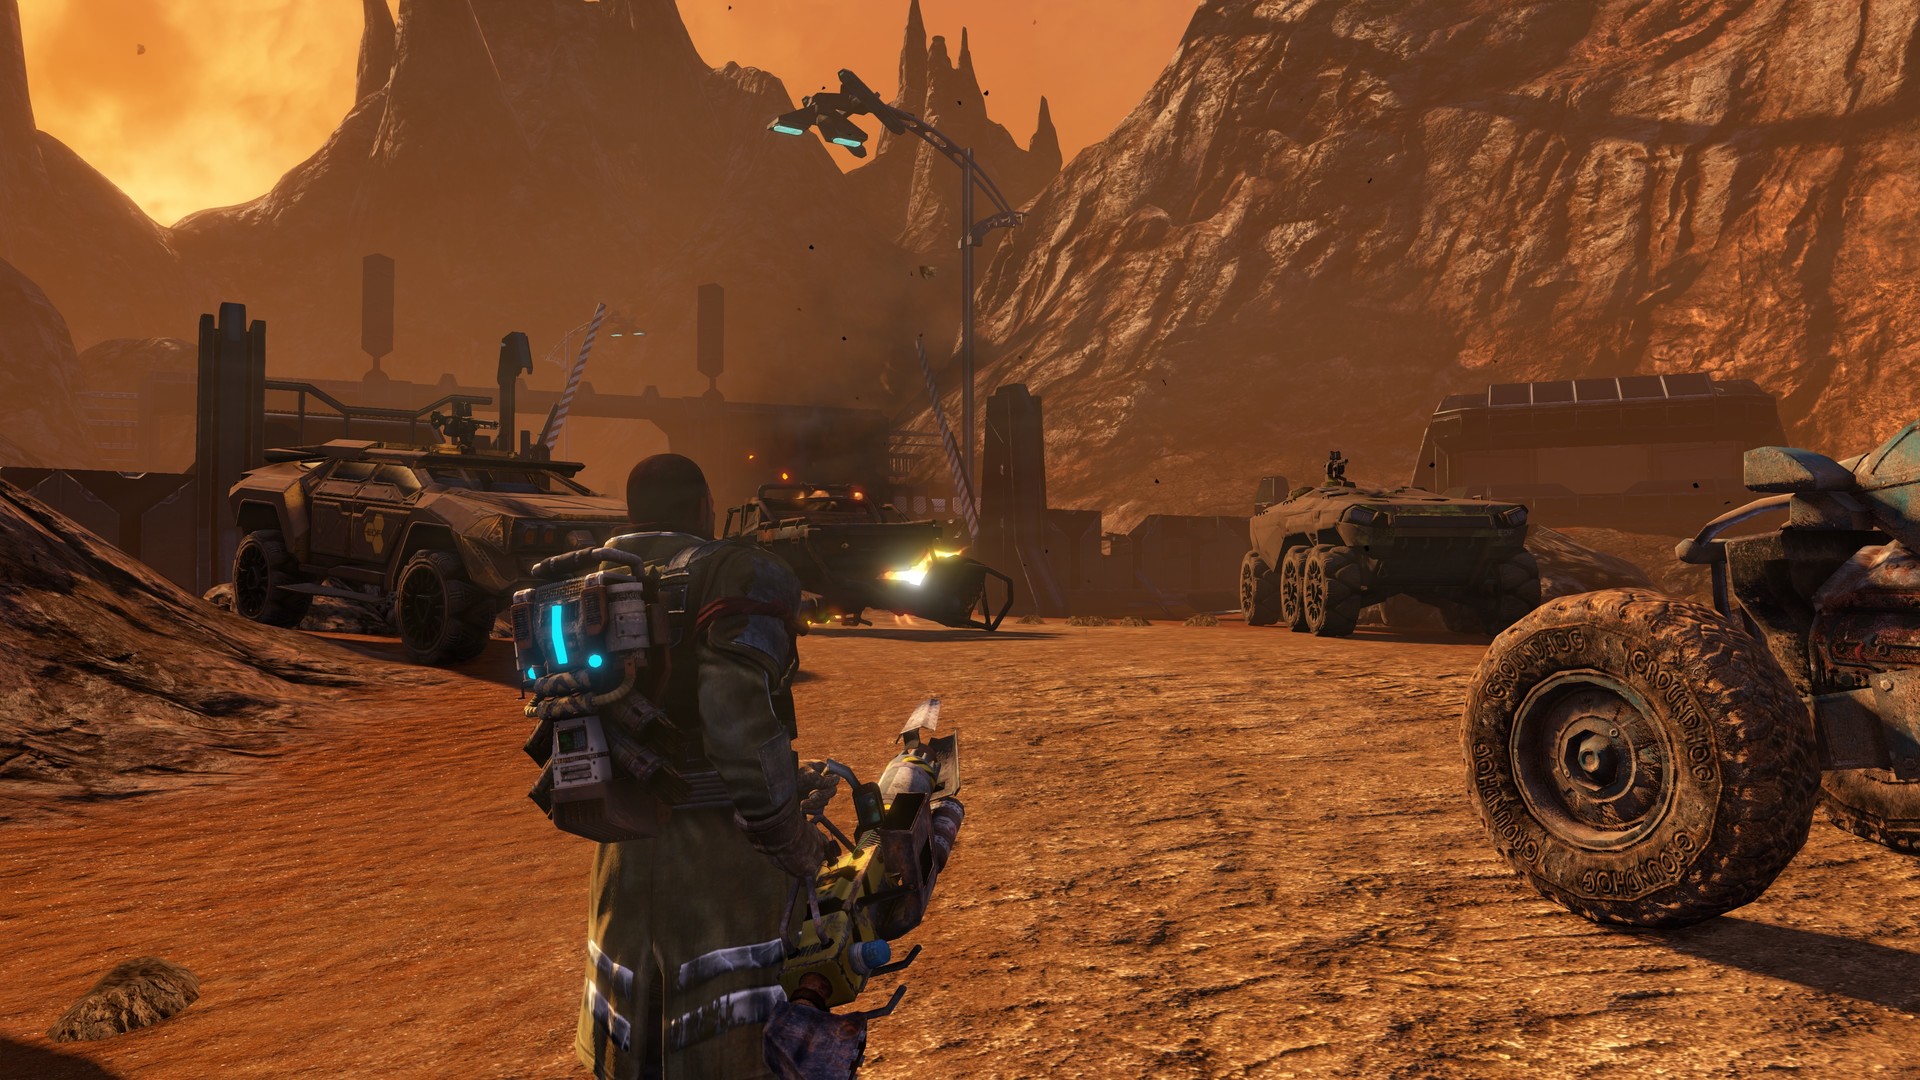 Save 80% on Red Faction Guerrilla Re-Mars-tered on Steam